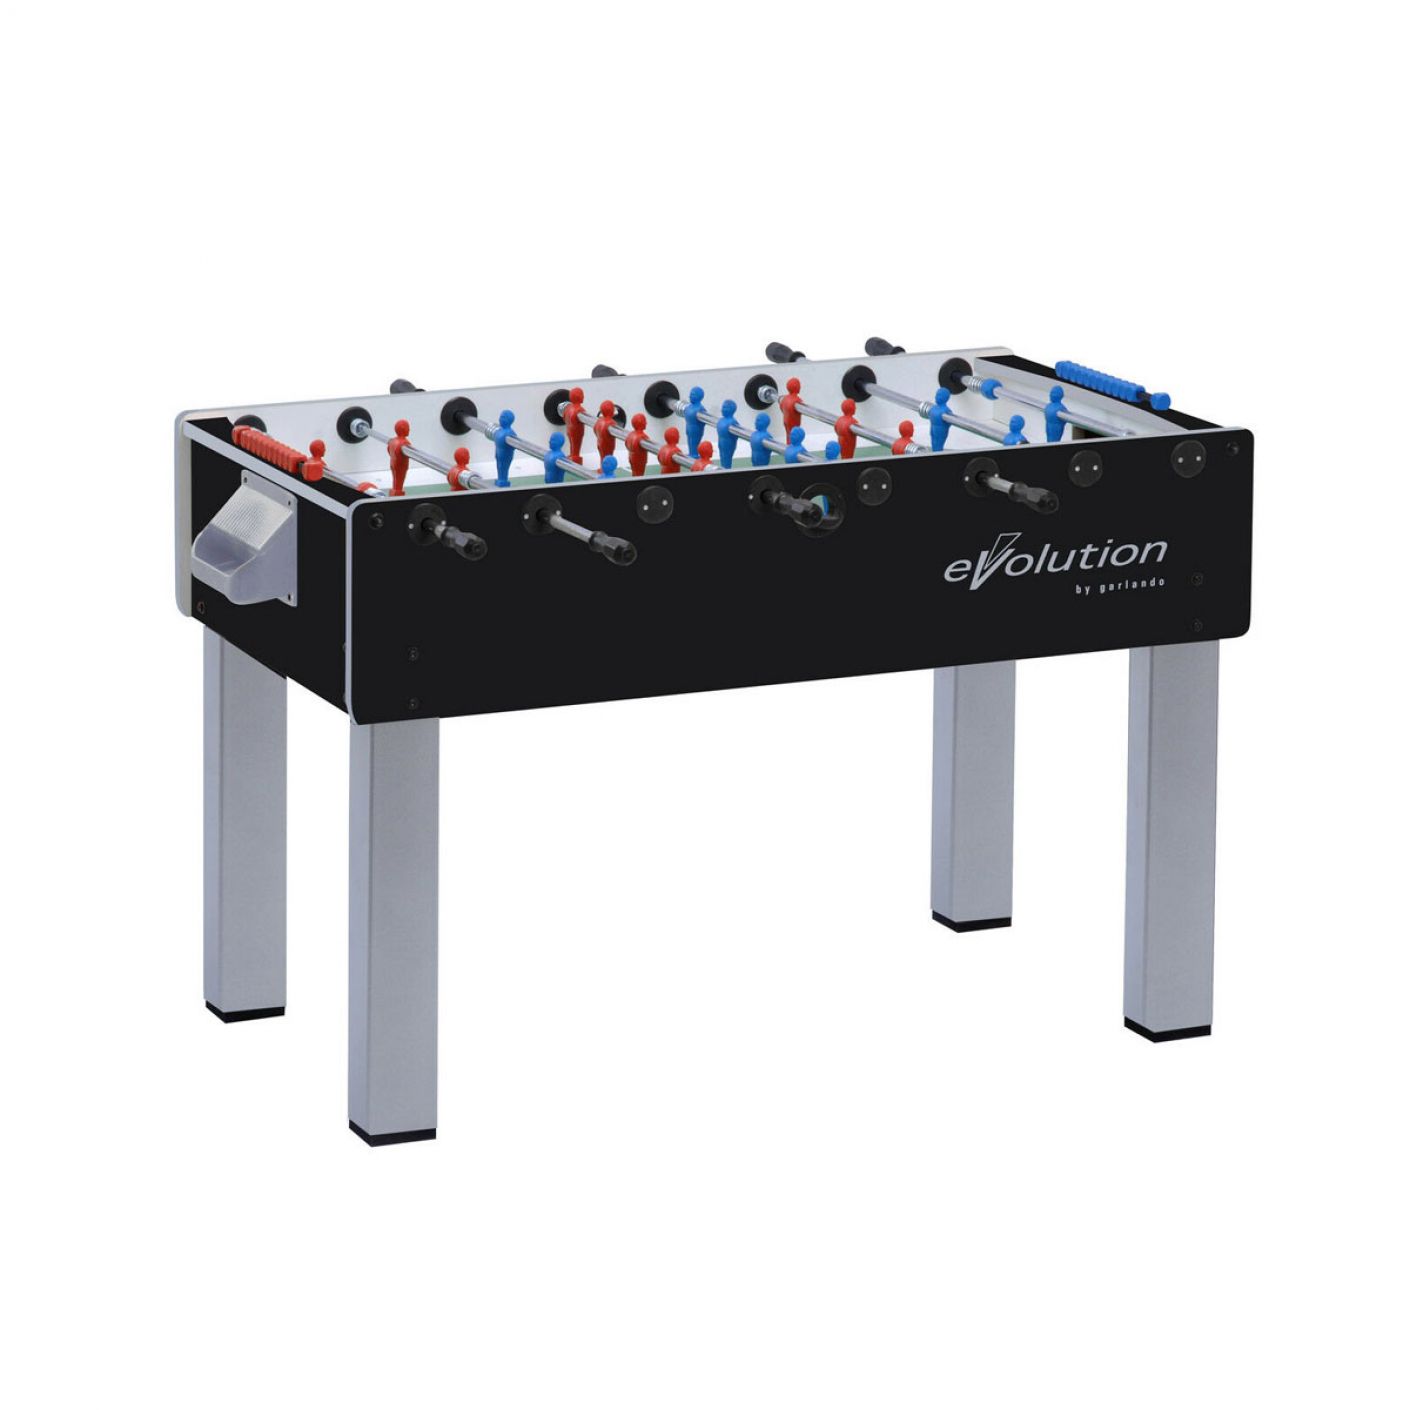 Garlando F-200 EVOLUTION football table with retracting rods